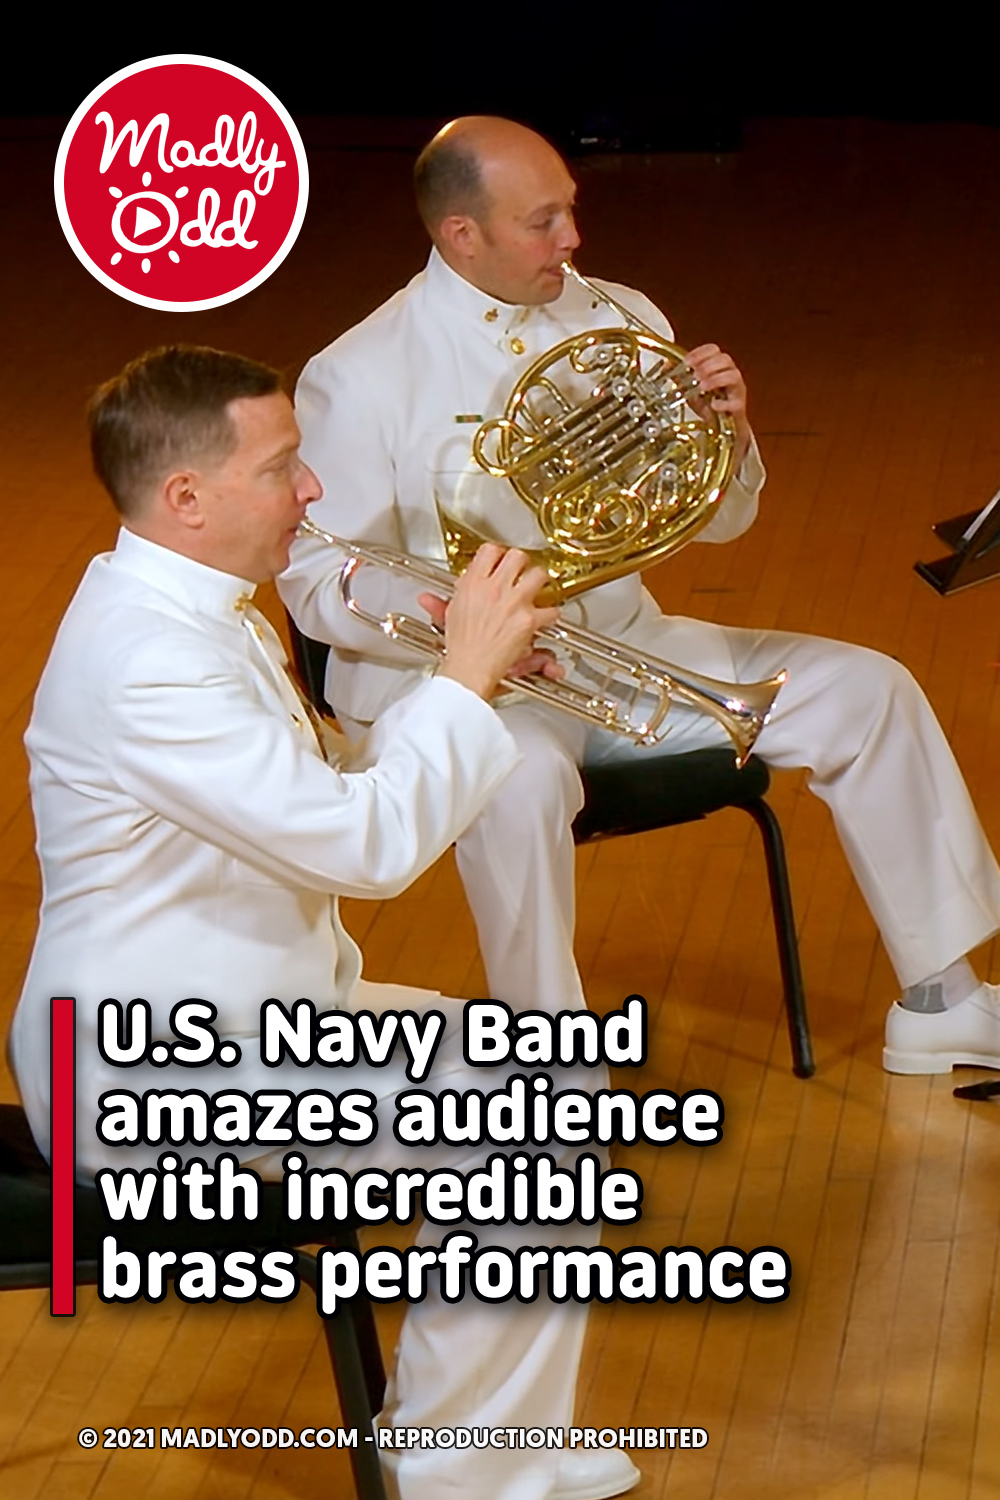 U.S. Navy Band amazes audience with incredible brass performance